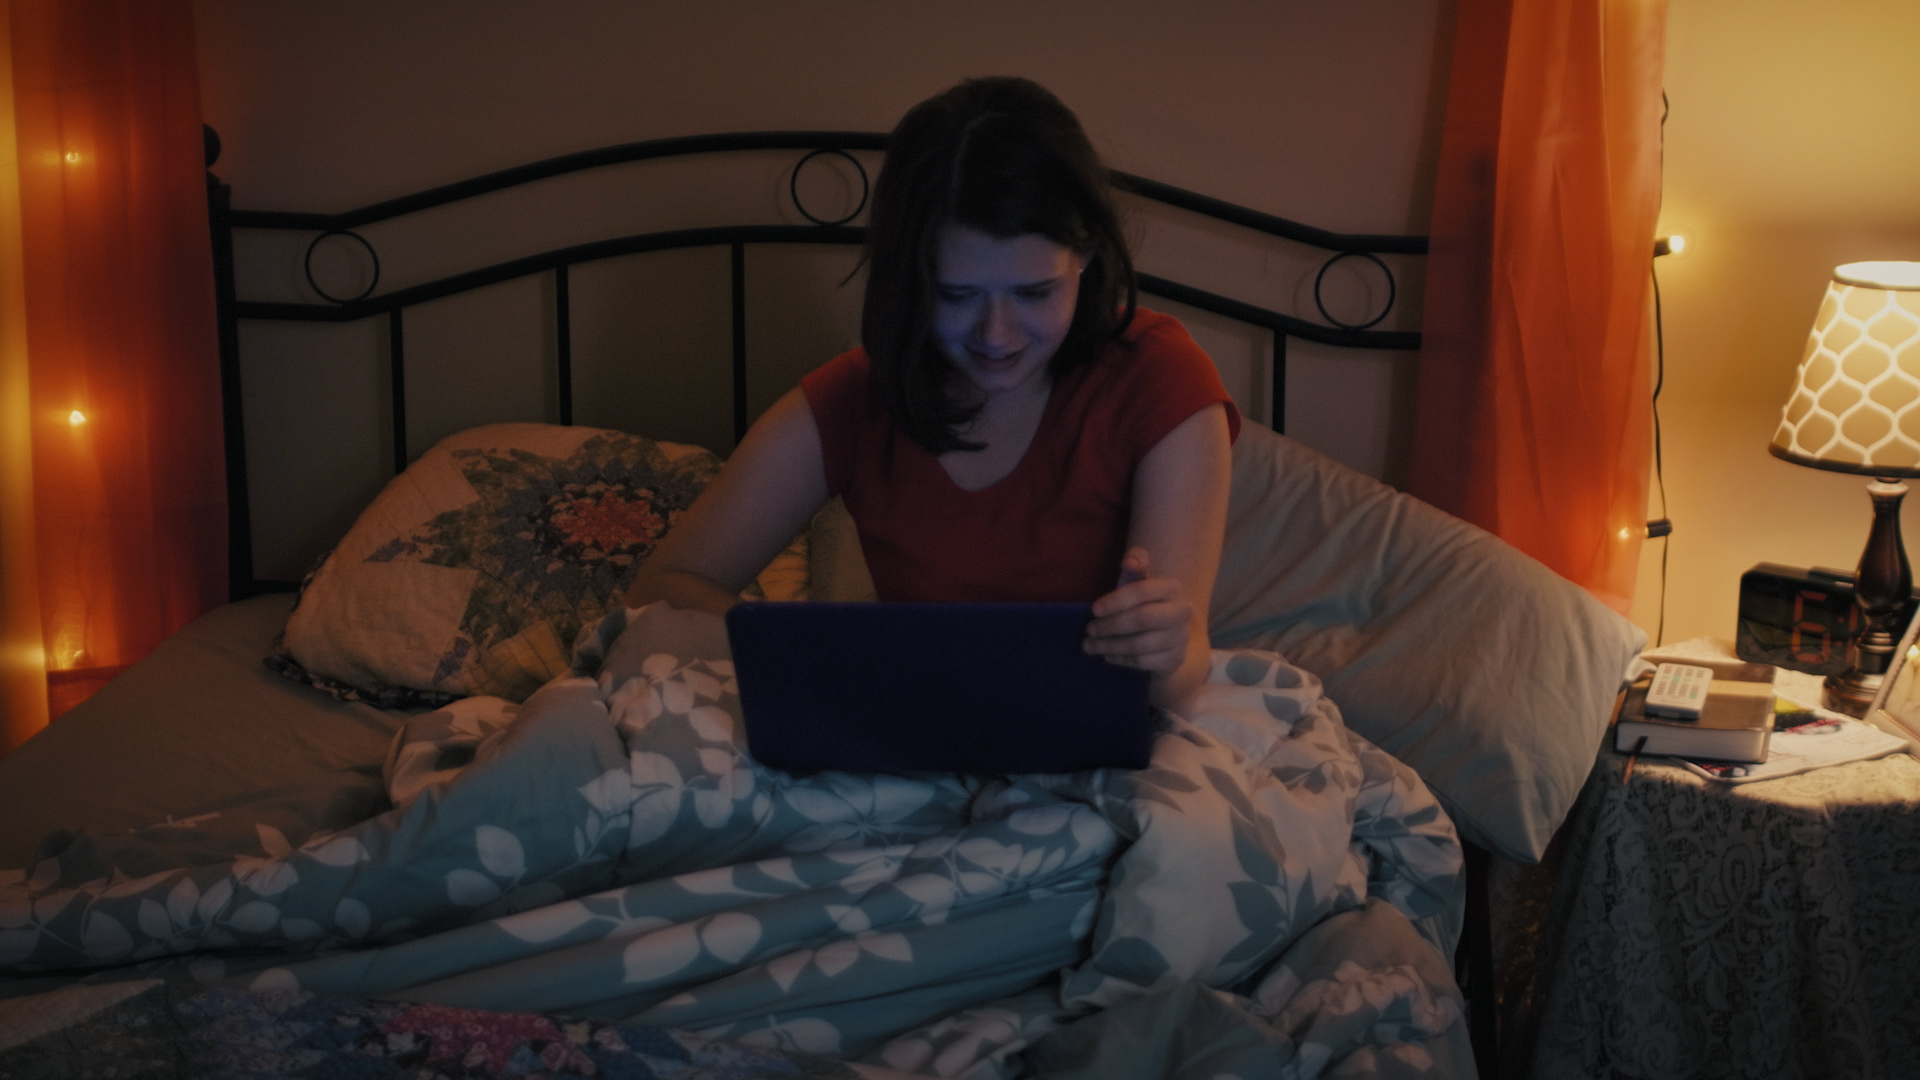 Clara opens her laptop up while laying in bed